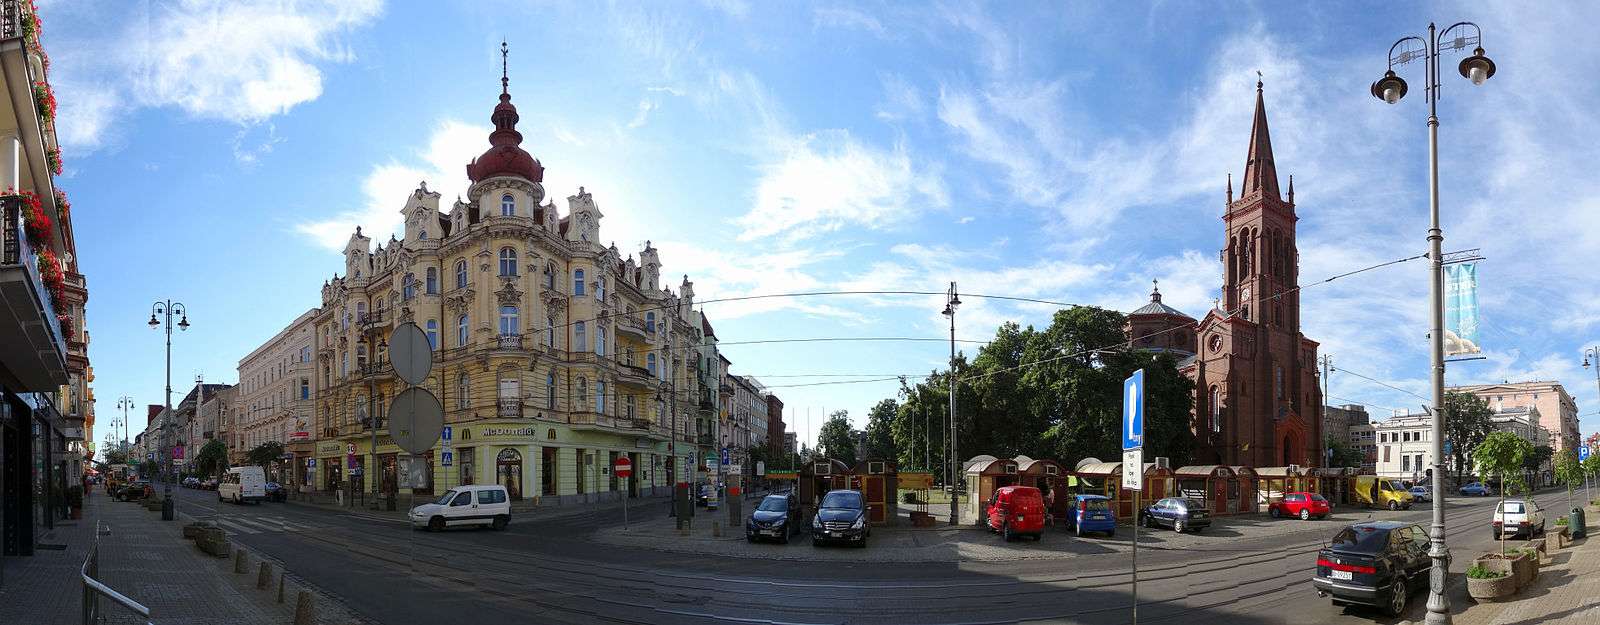 Freedom Square view from Gdanska Street